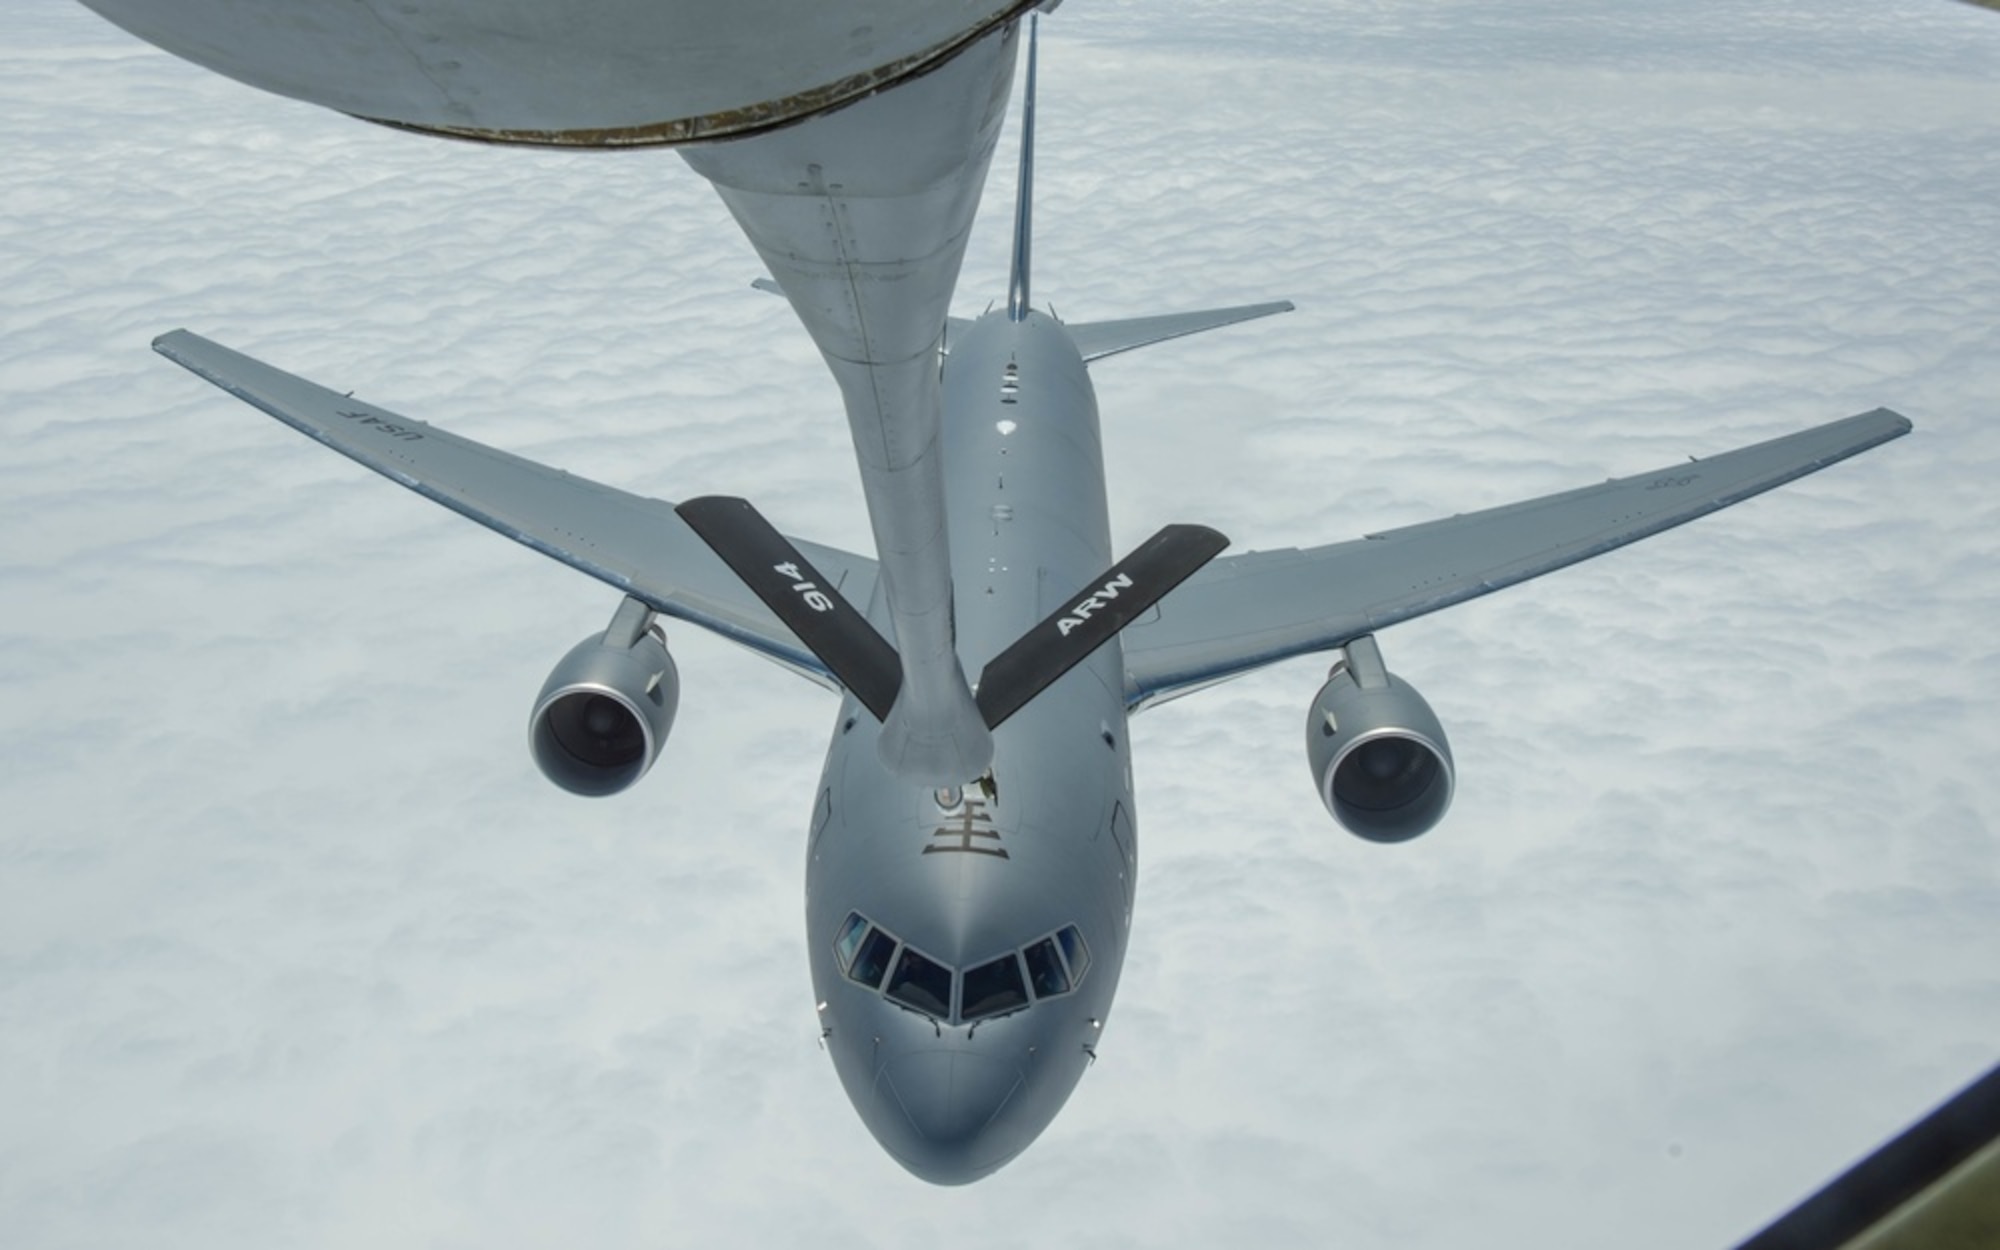 KC-135 boom is extended while a 157th ARW KC-46 gets closer for refueling over the Atlantic Ocean